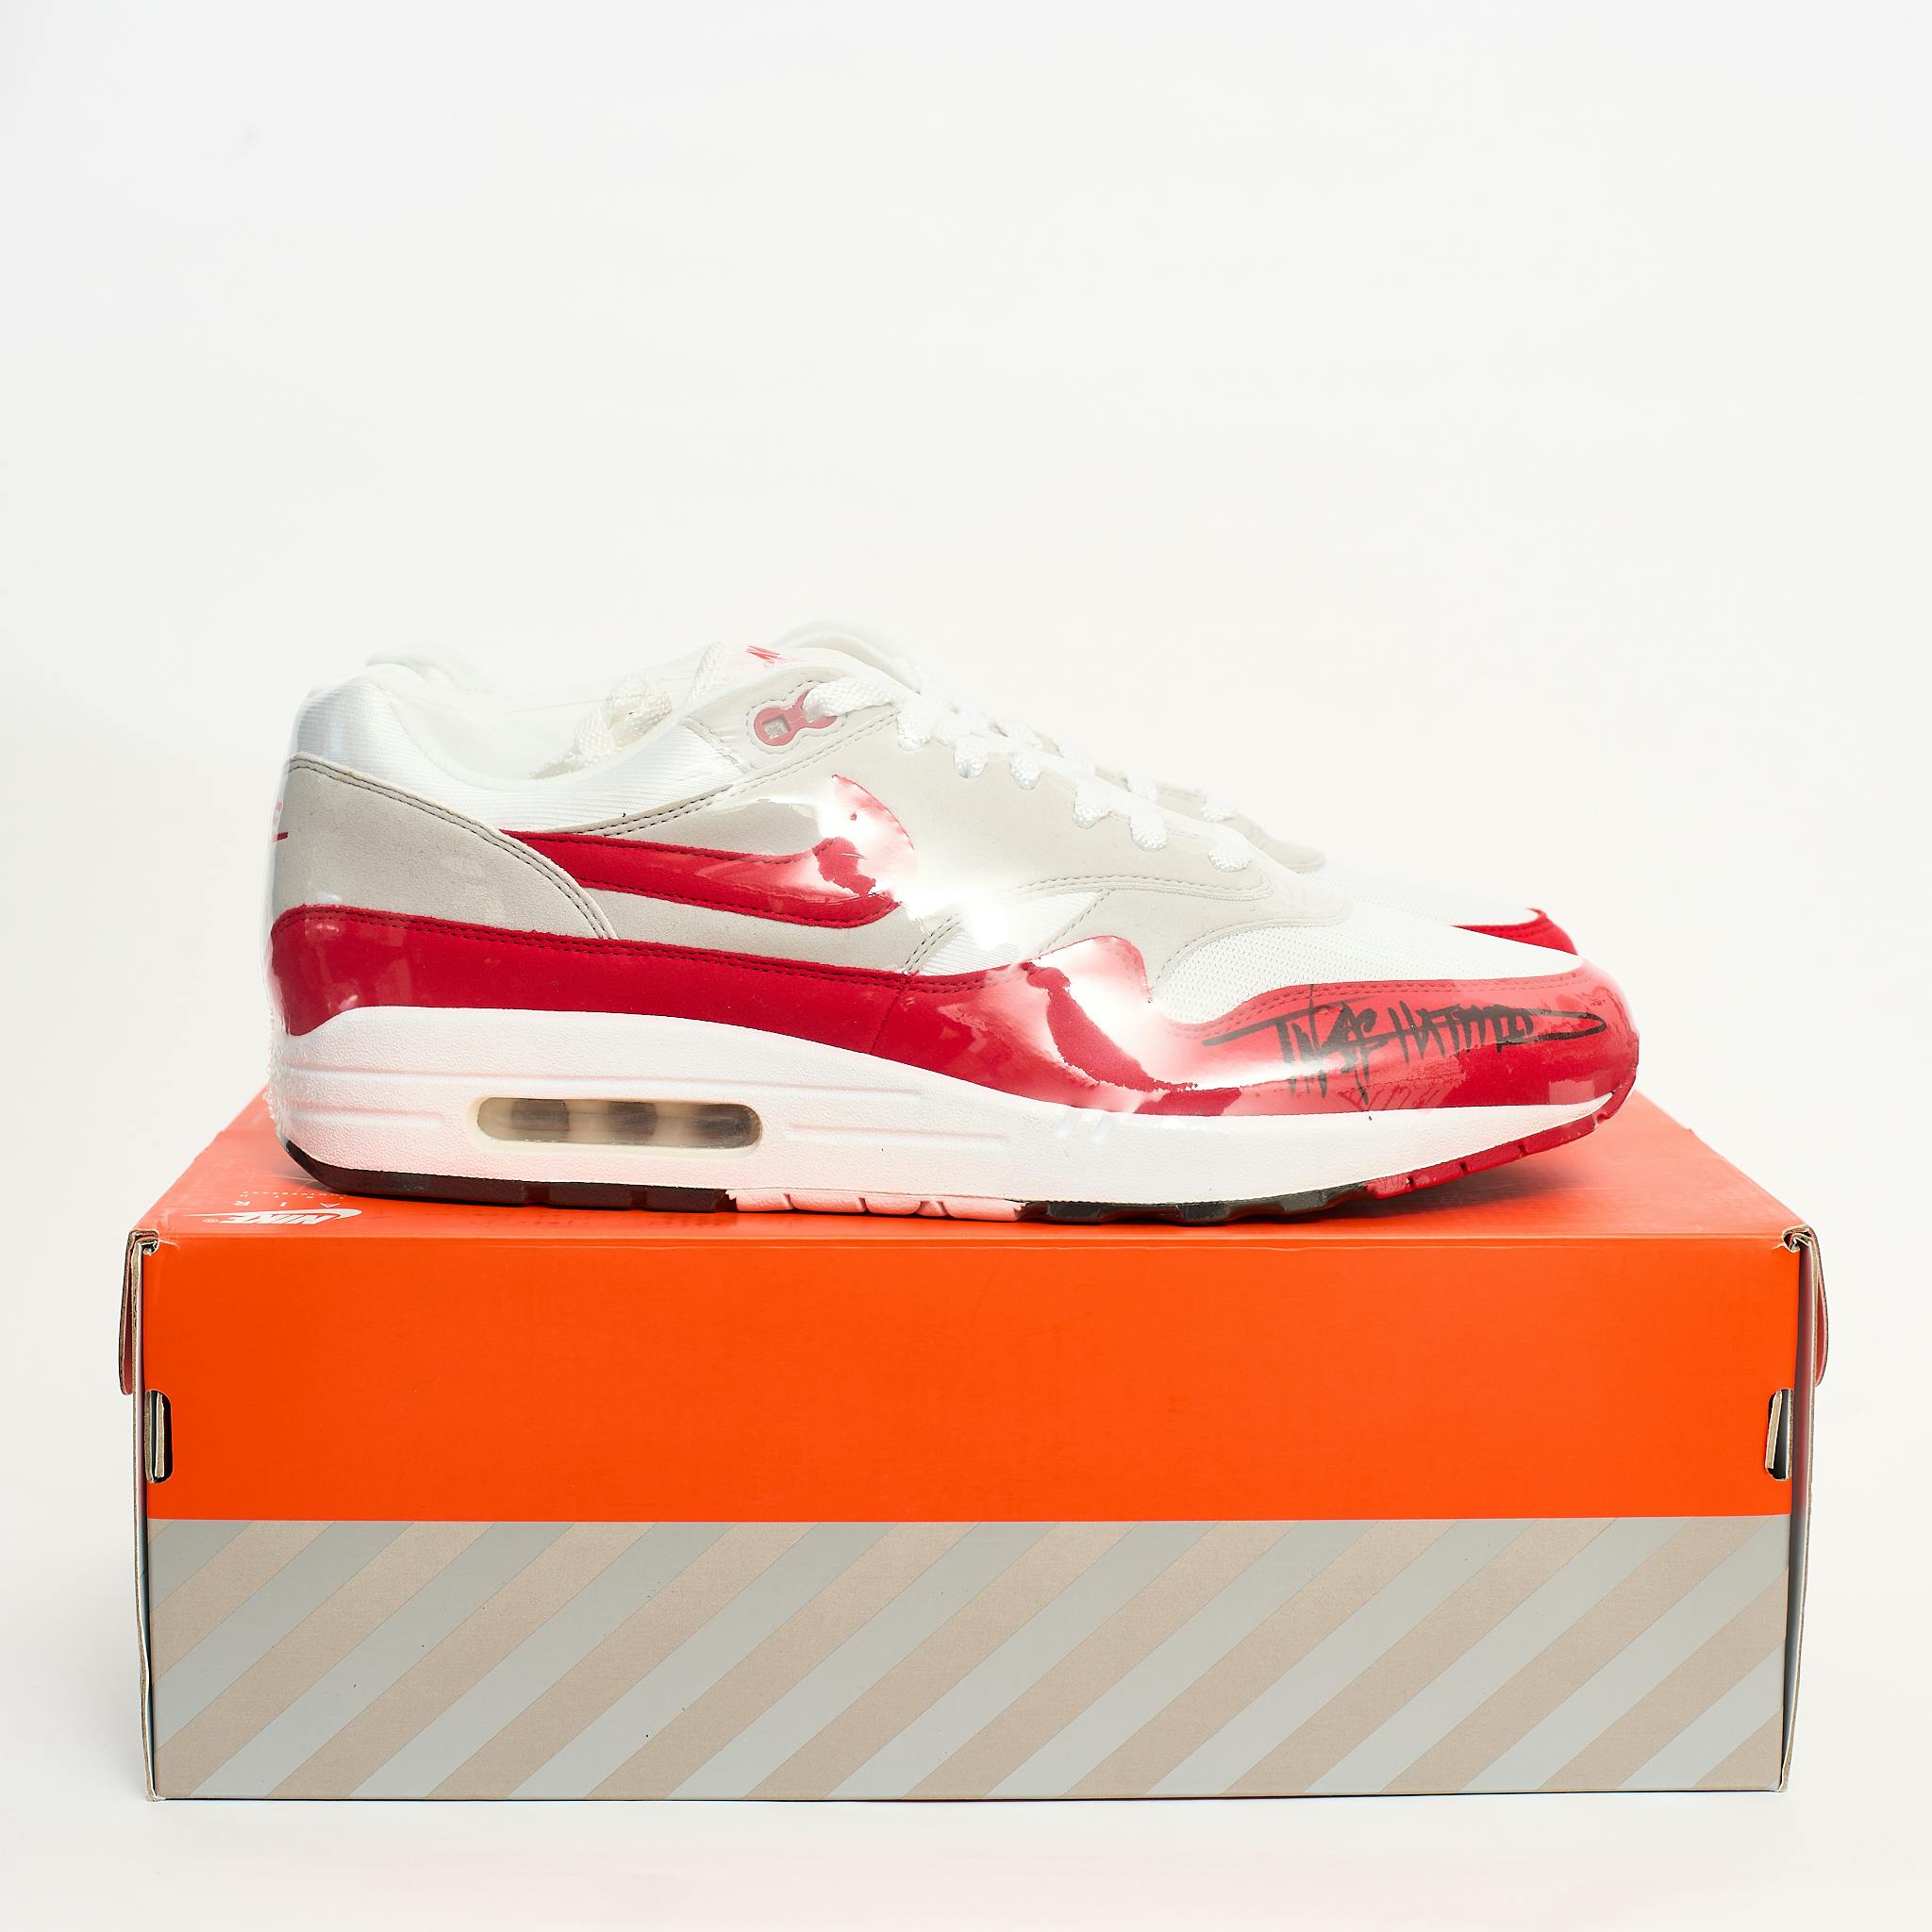 Nike Air Max 1 Anniversary Red Autographed Tinker Hatfield - 1